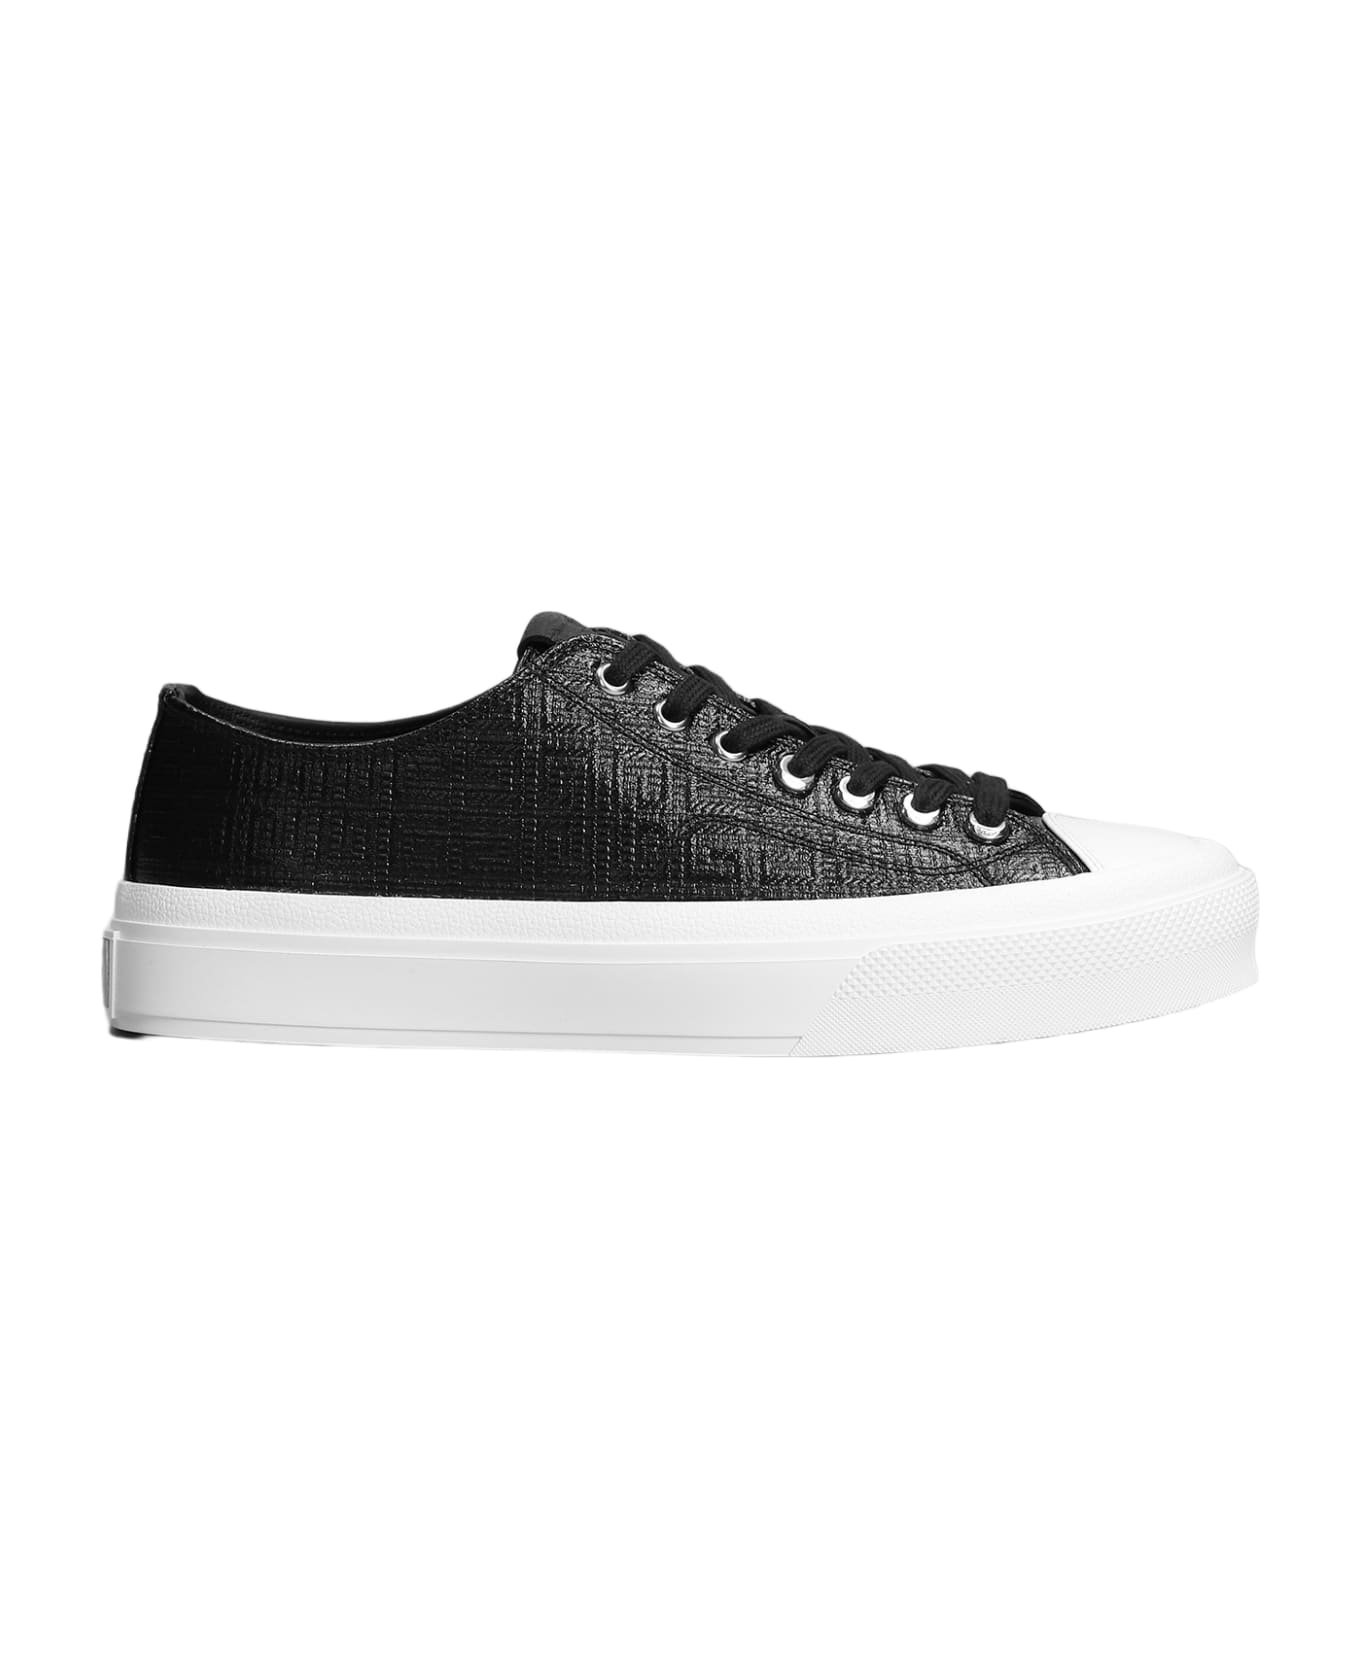 Givenchy Sneakers In Black Leather - black